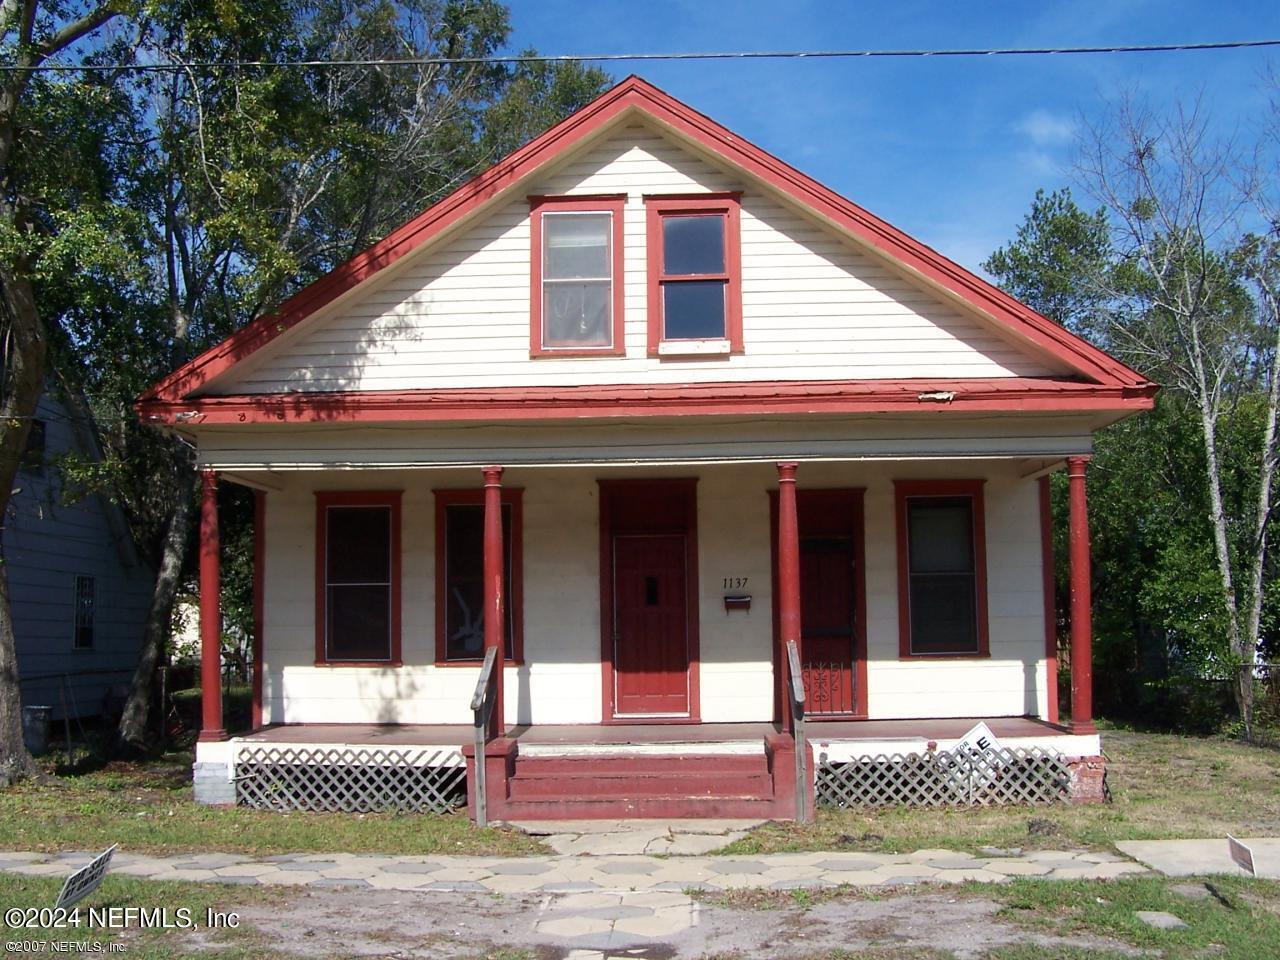 Jacksonville, FL home for sale located at 1137 E 13th Street, Jacksonville, FL 32206